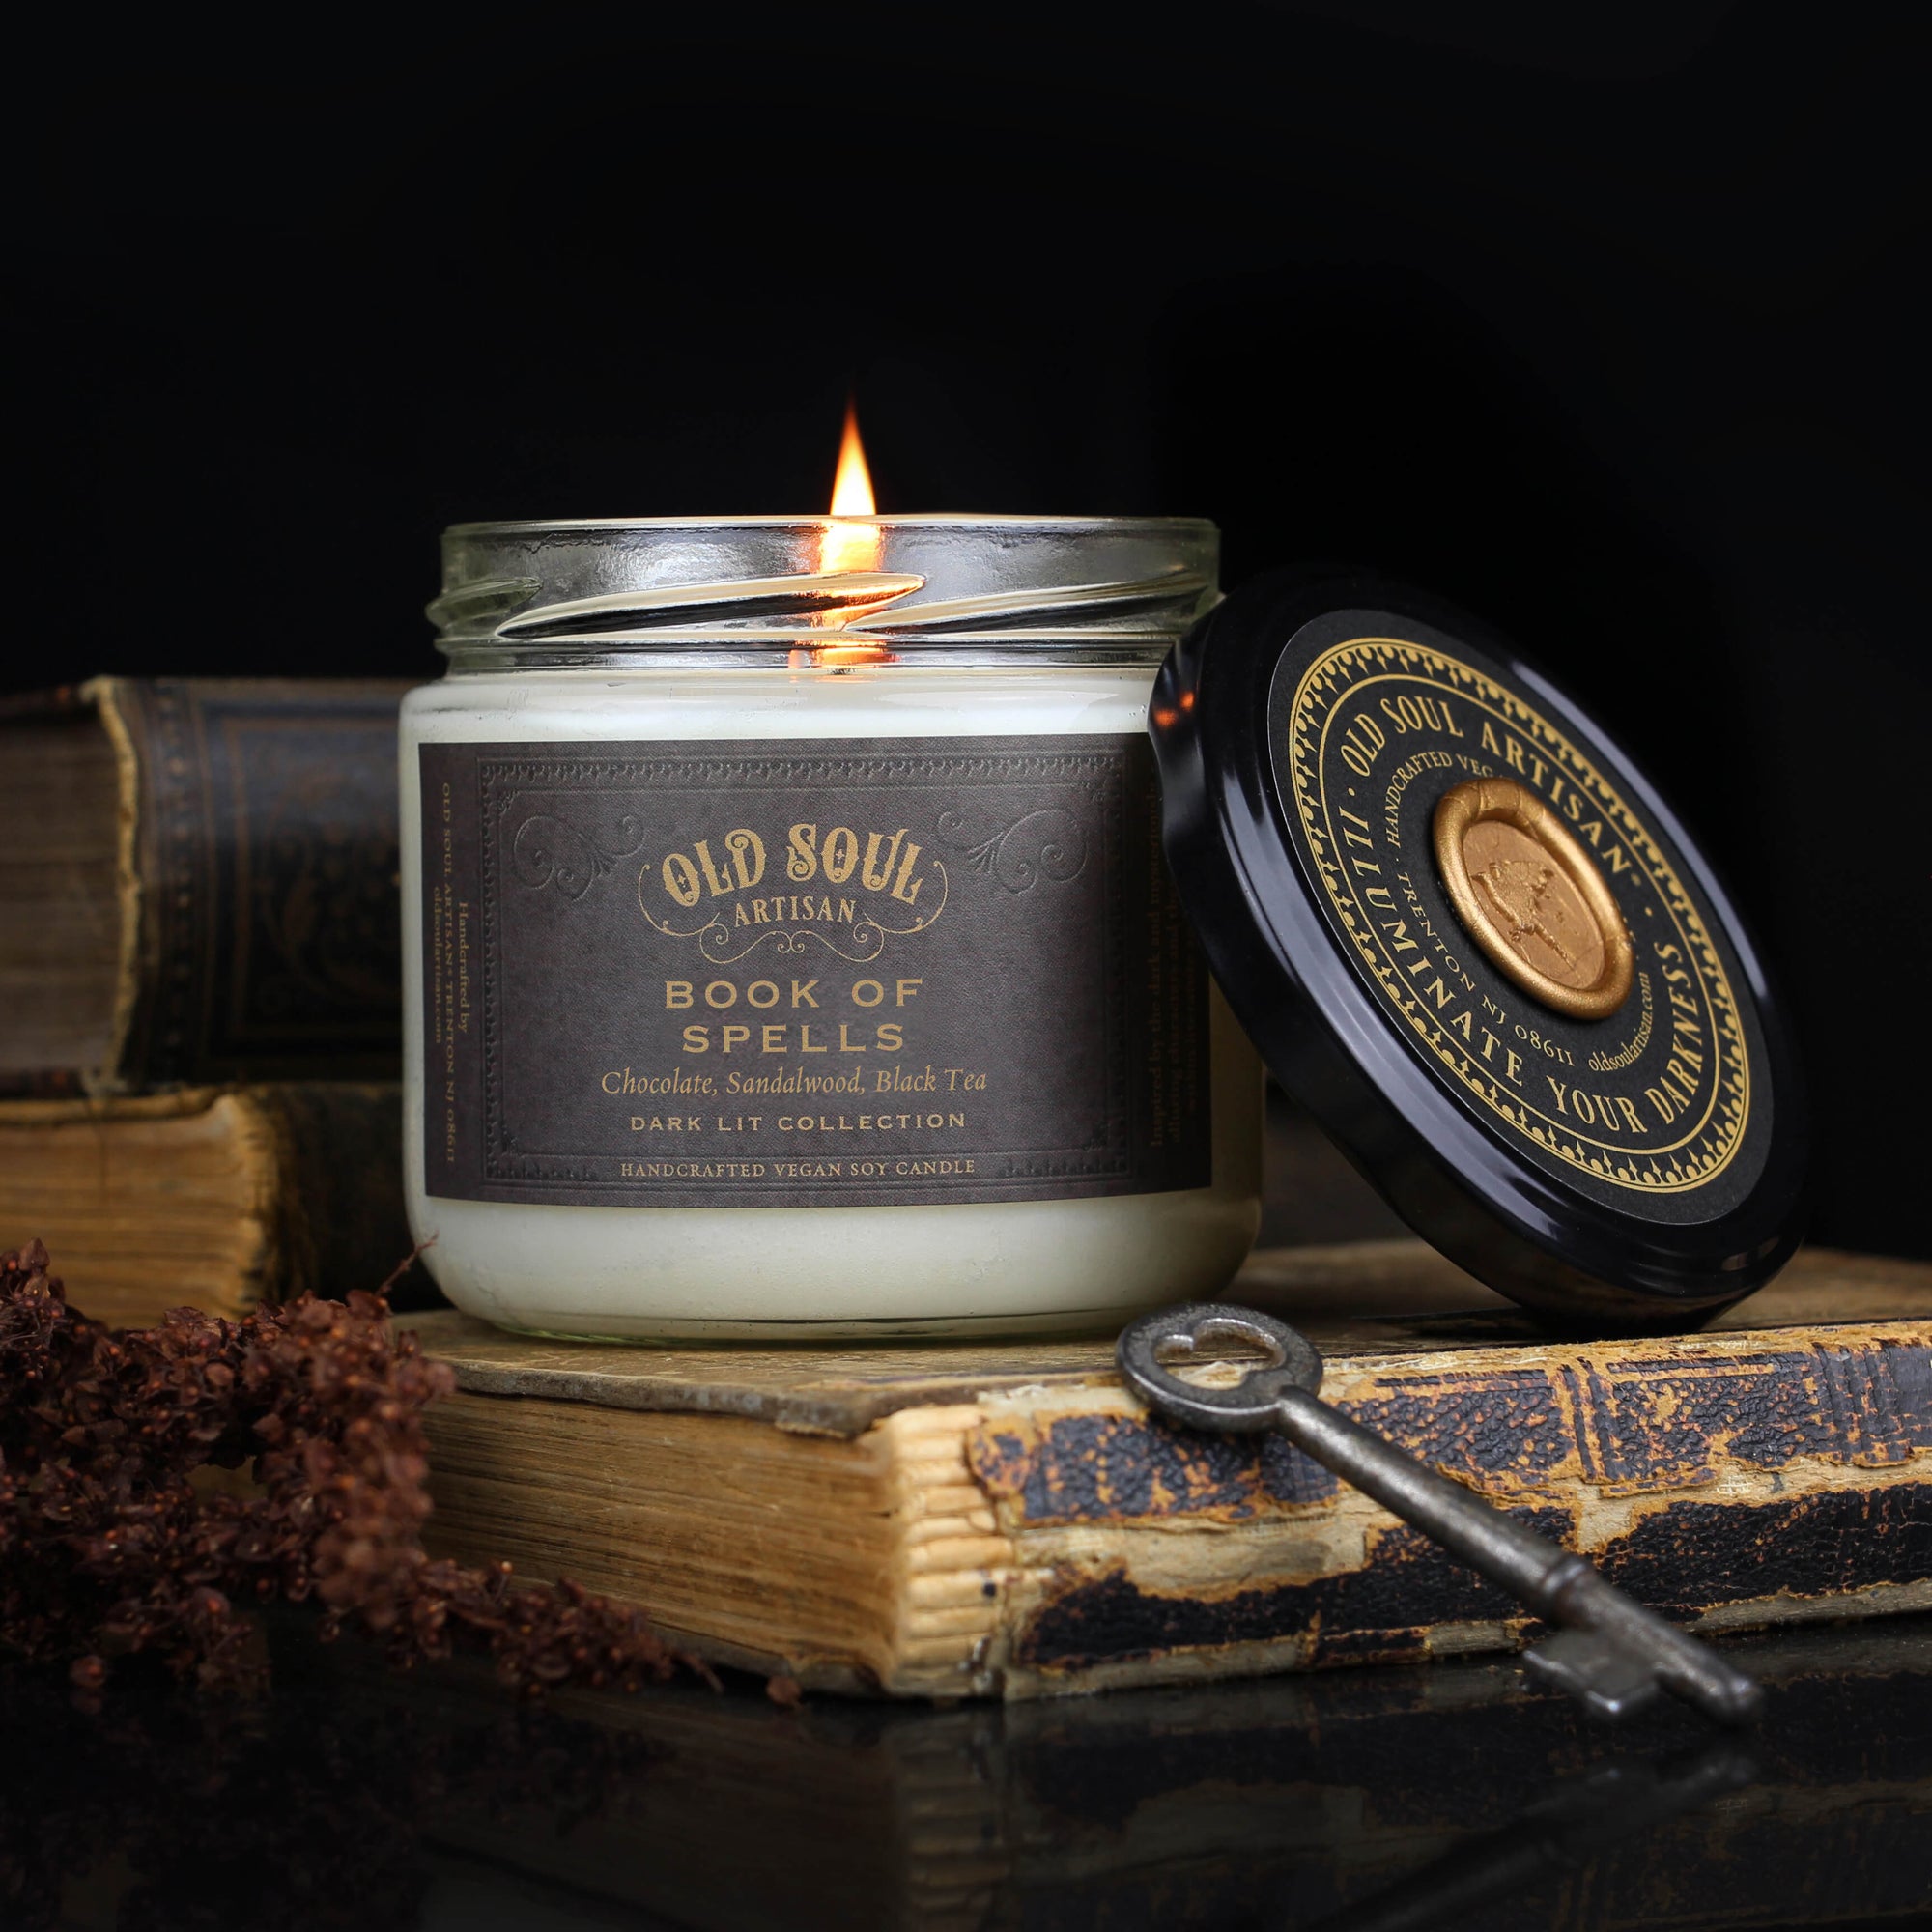 Book of Spells Soy Candle - Old Soul Artisan